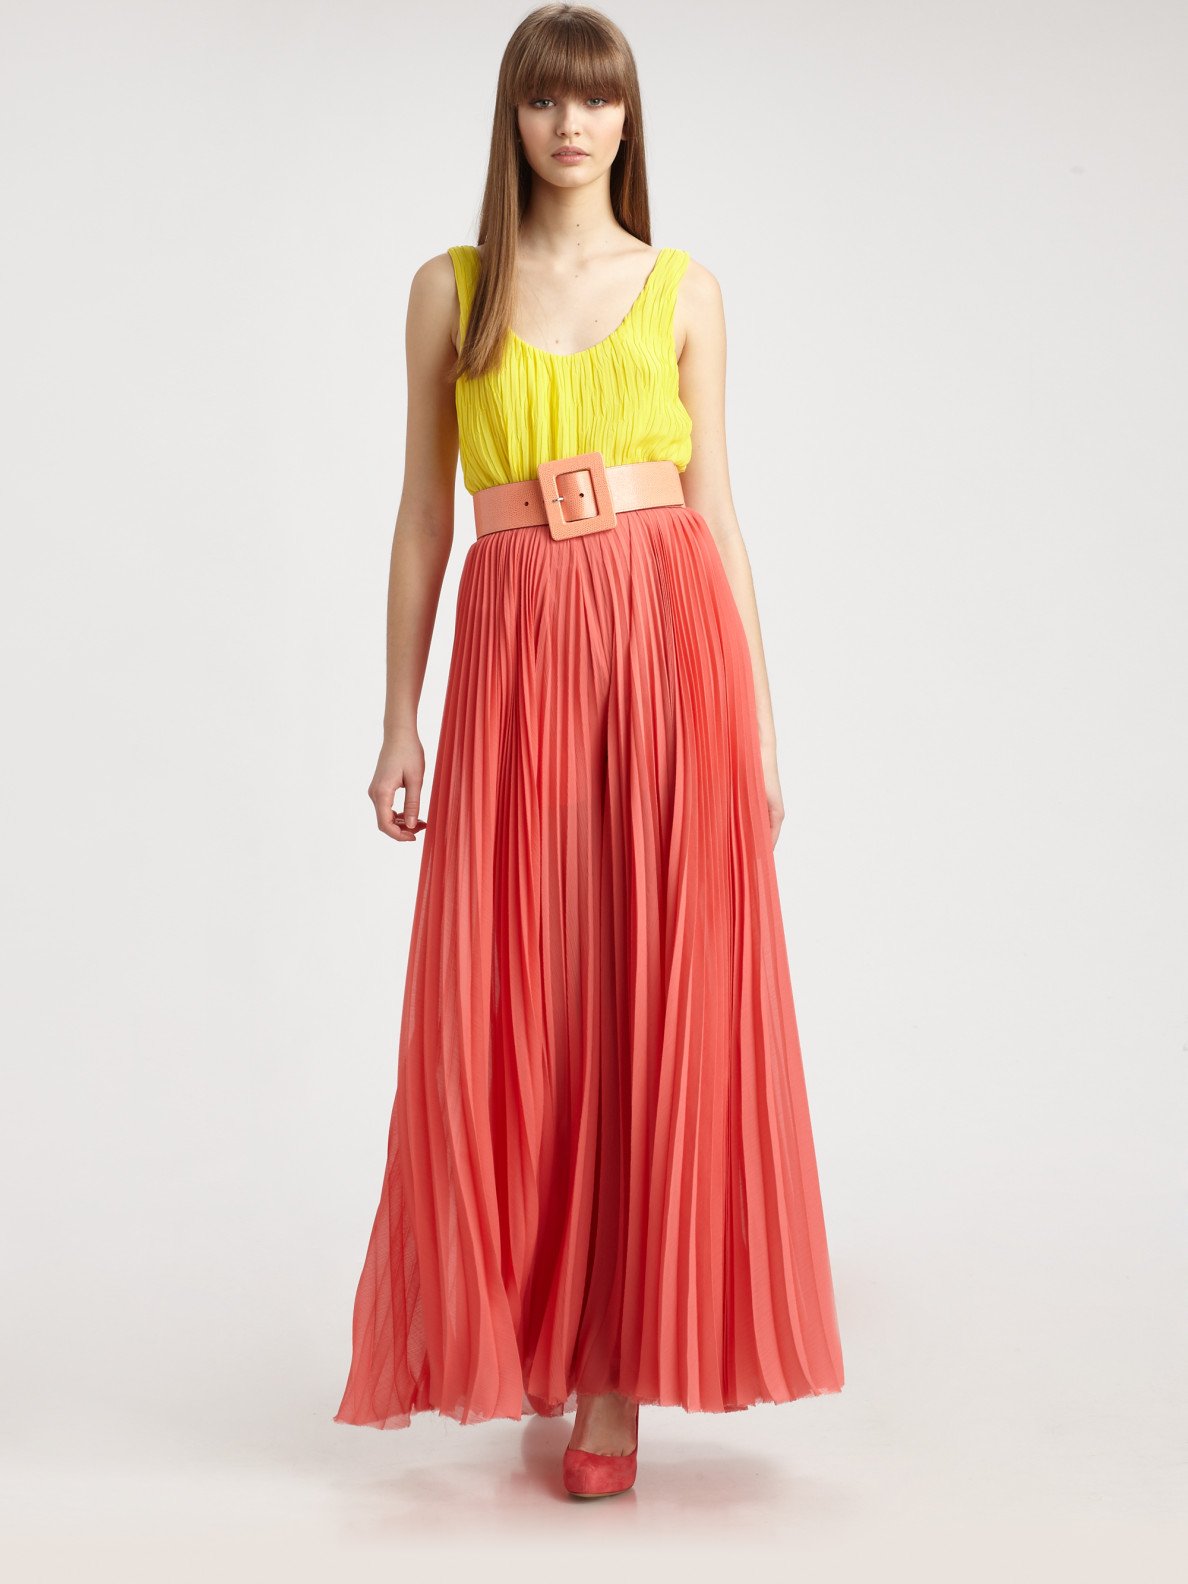 Lyst - Alice + Olivia Leila Pleated Maxi Dress in Red